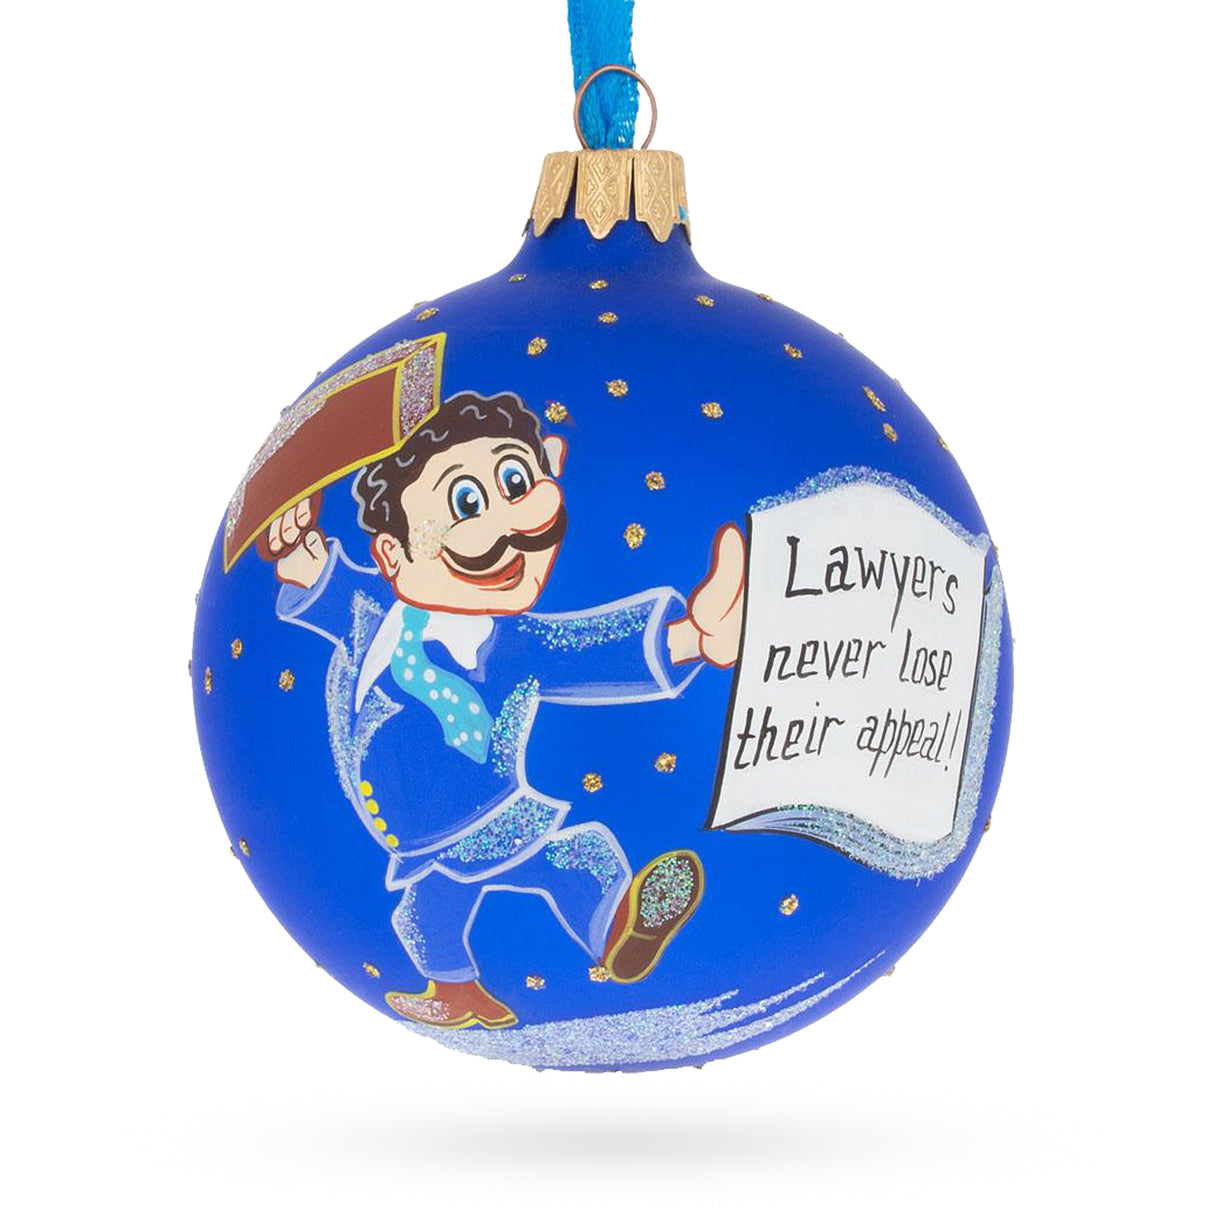 Glass Distinguished Lawyer with Briefcase - Blown Glass Ball Christmas Ornament 3.25 Inches in Blue color Round